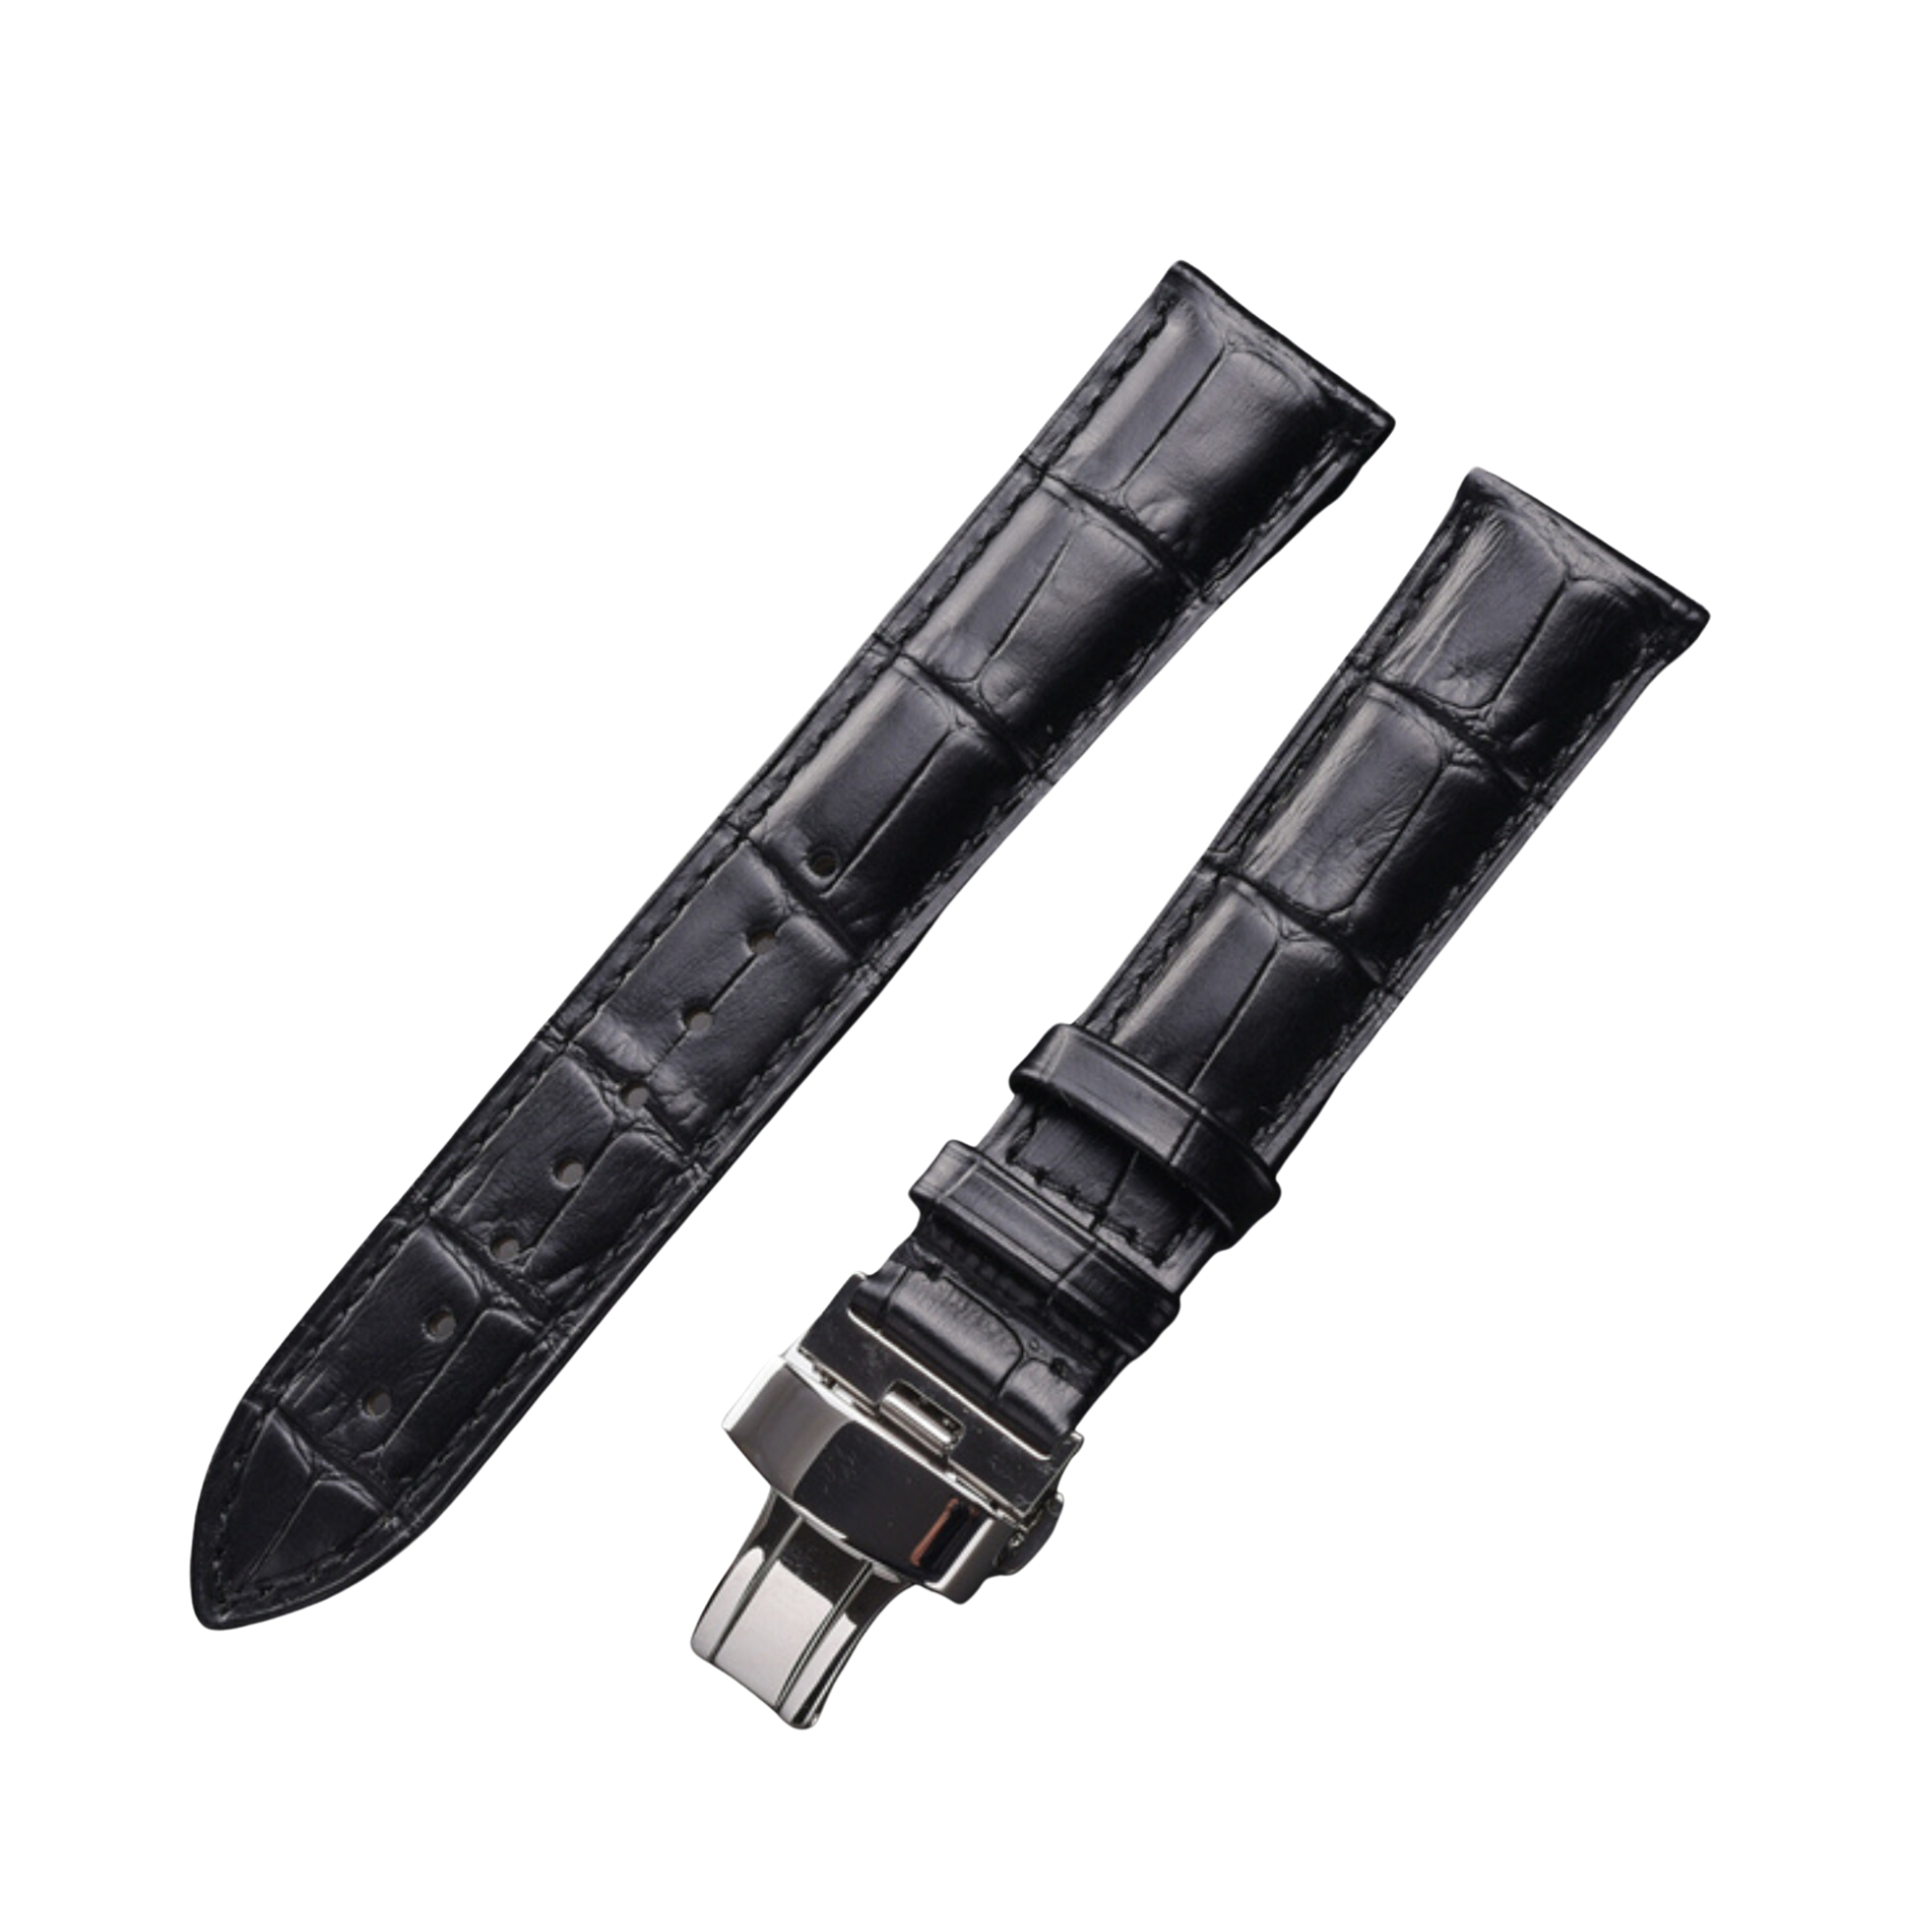 Quality Leather Watchbands Watch Band/Strap with Steel Pin buckle - Black 20 mm watch leather strap band india online dream watches